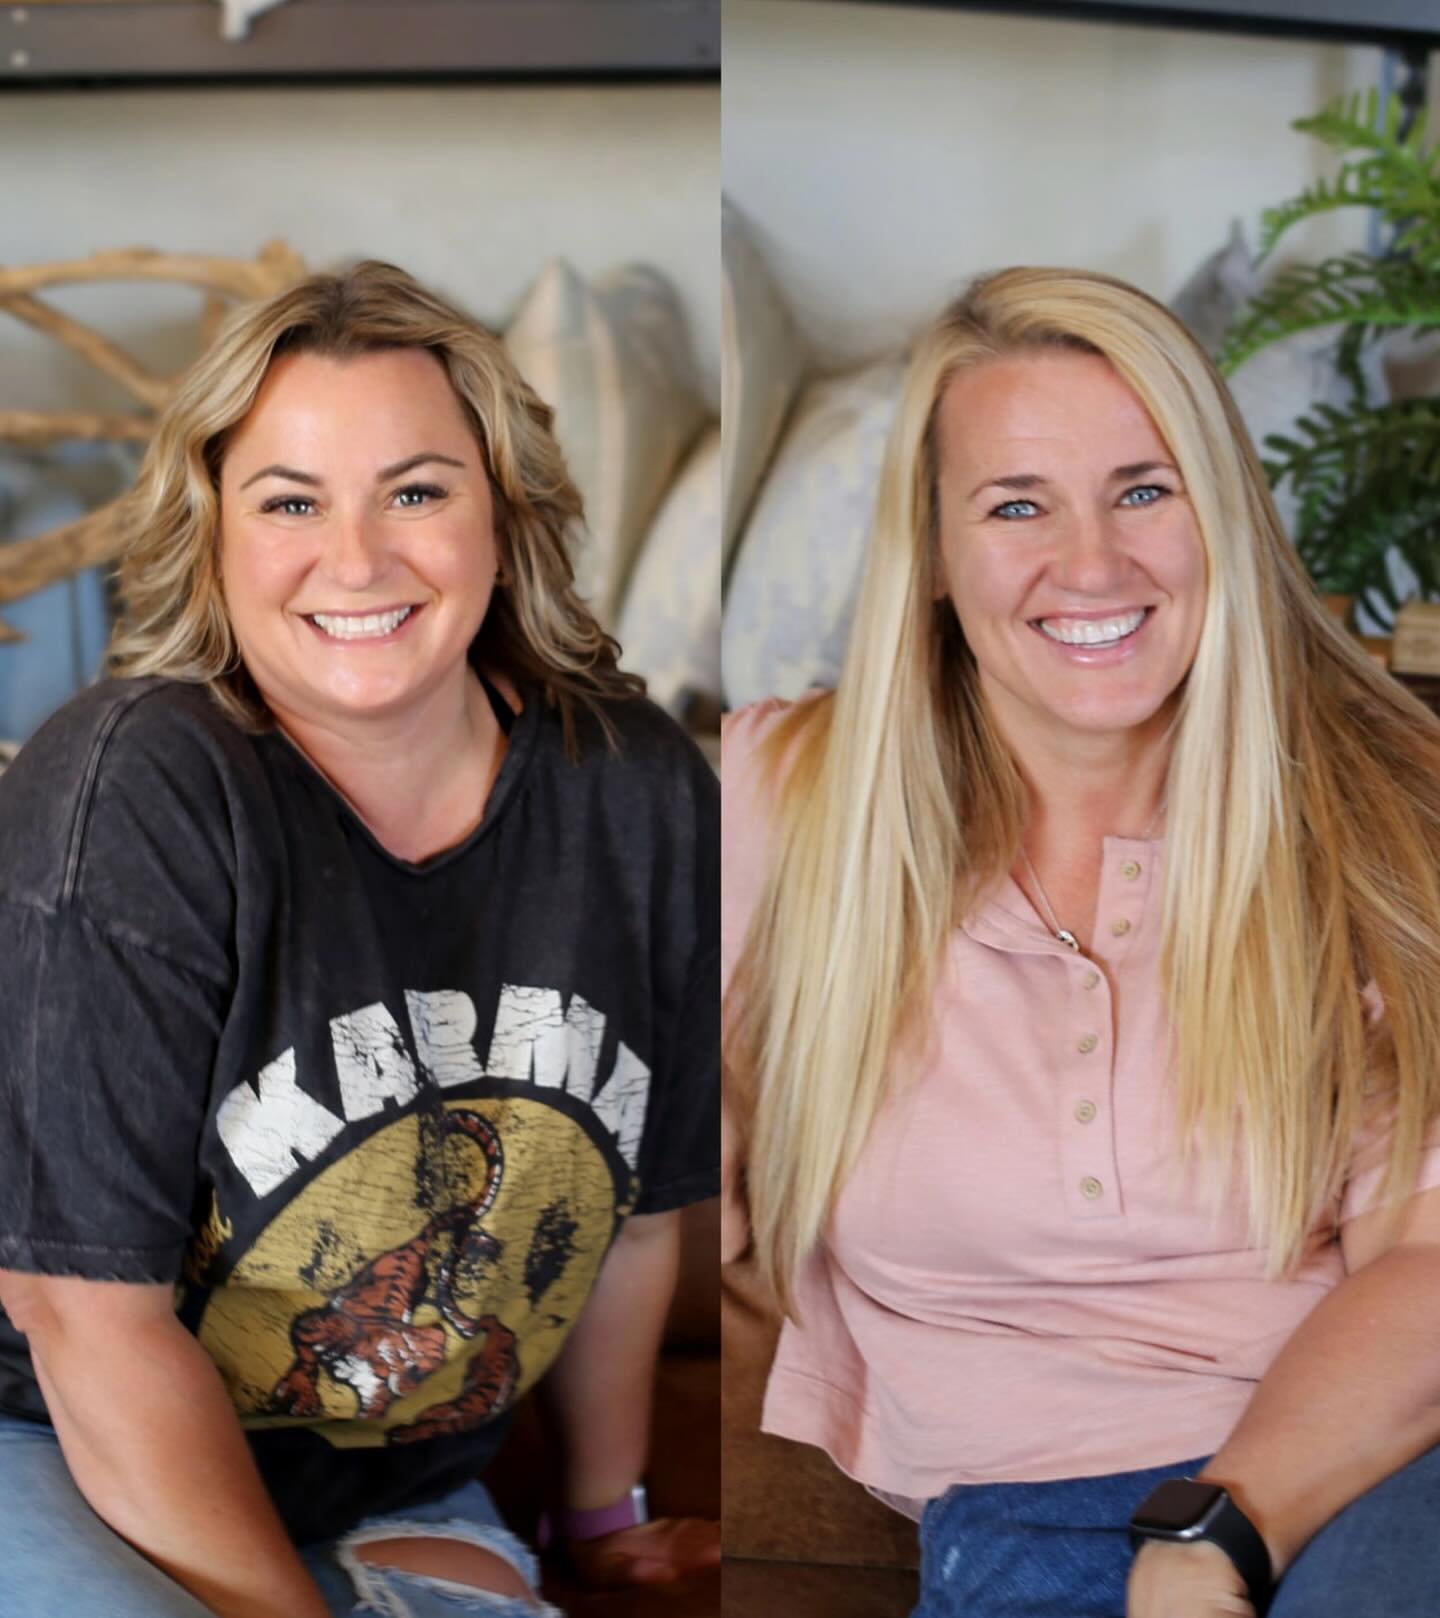 Happy Mother&rsquo;s Day to these two sweet souls!

Bekah &amp; Stephanie, your kindness, dedication, and love for your families is nothing less than inspiring! Thank you for showing the dwell team what it means to be amazing mothers, friends, and ha